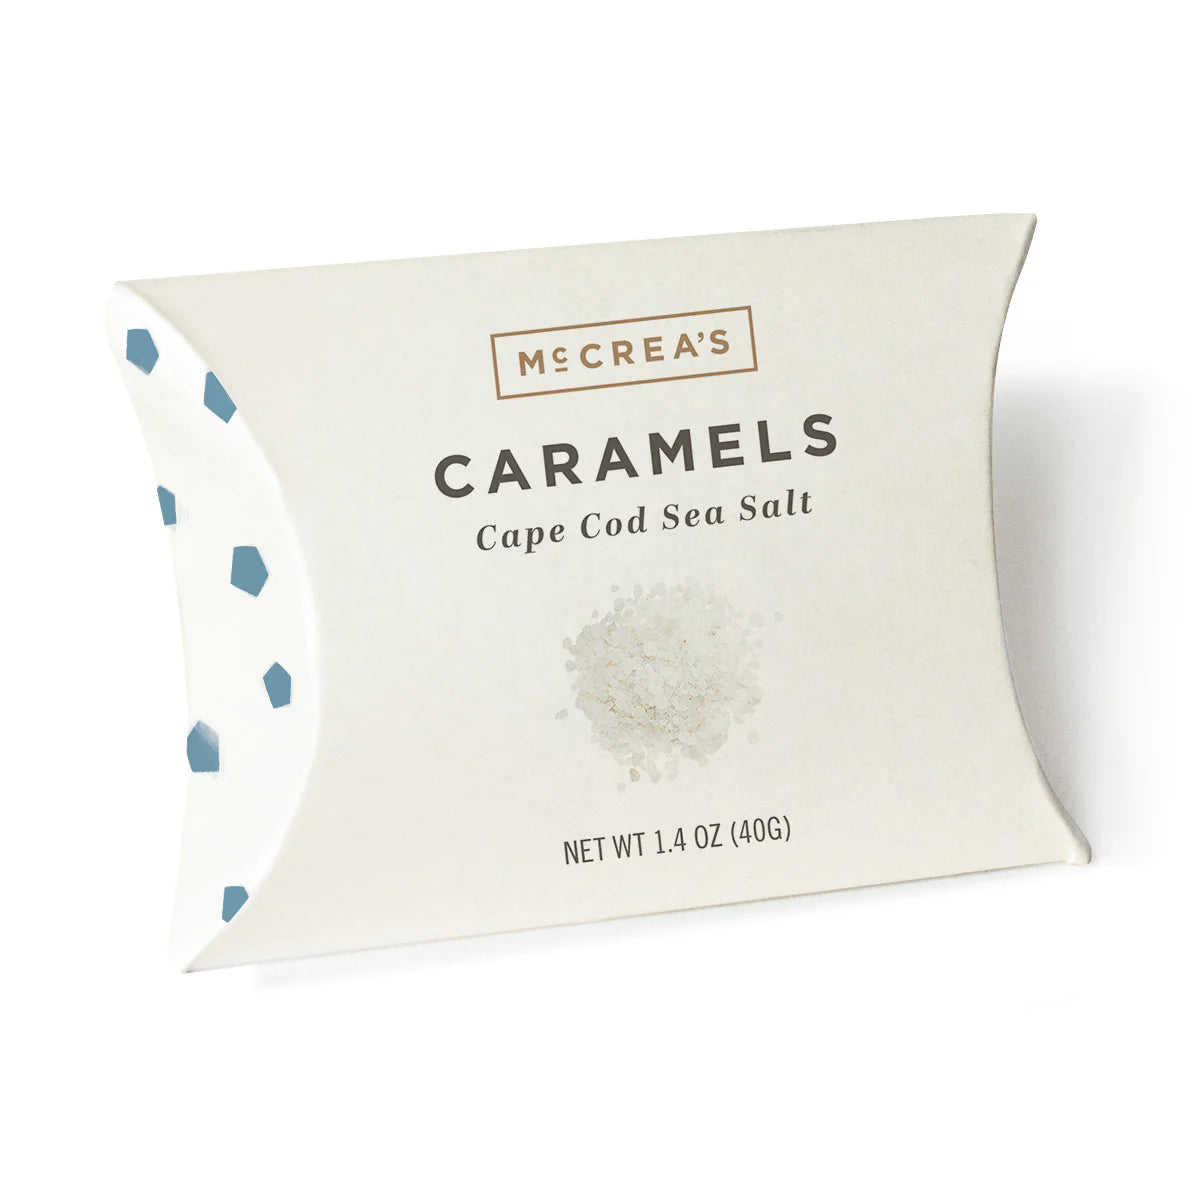 Cape Cod Caramels Pillow Box on white background.